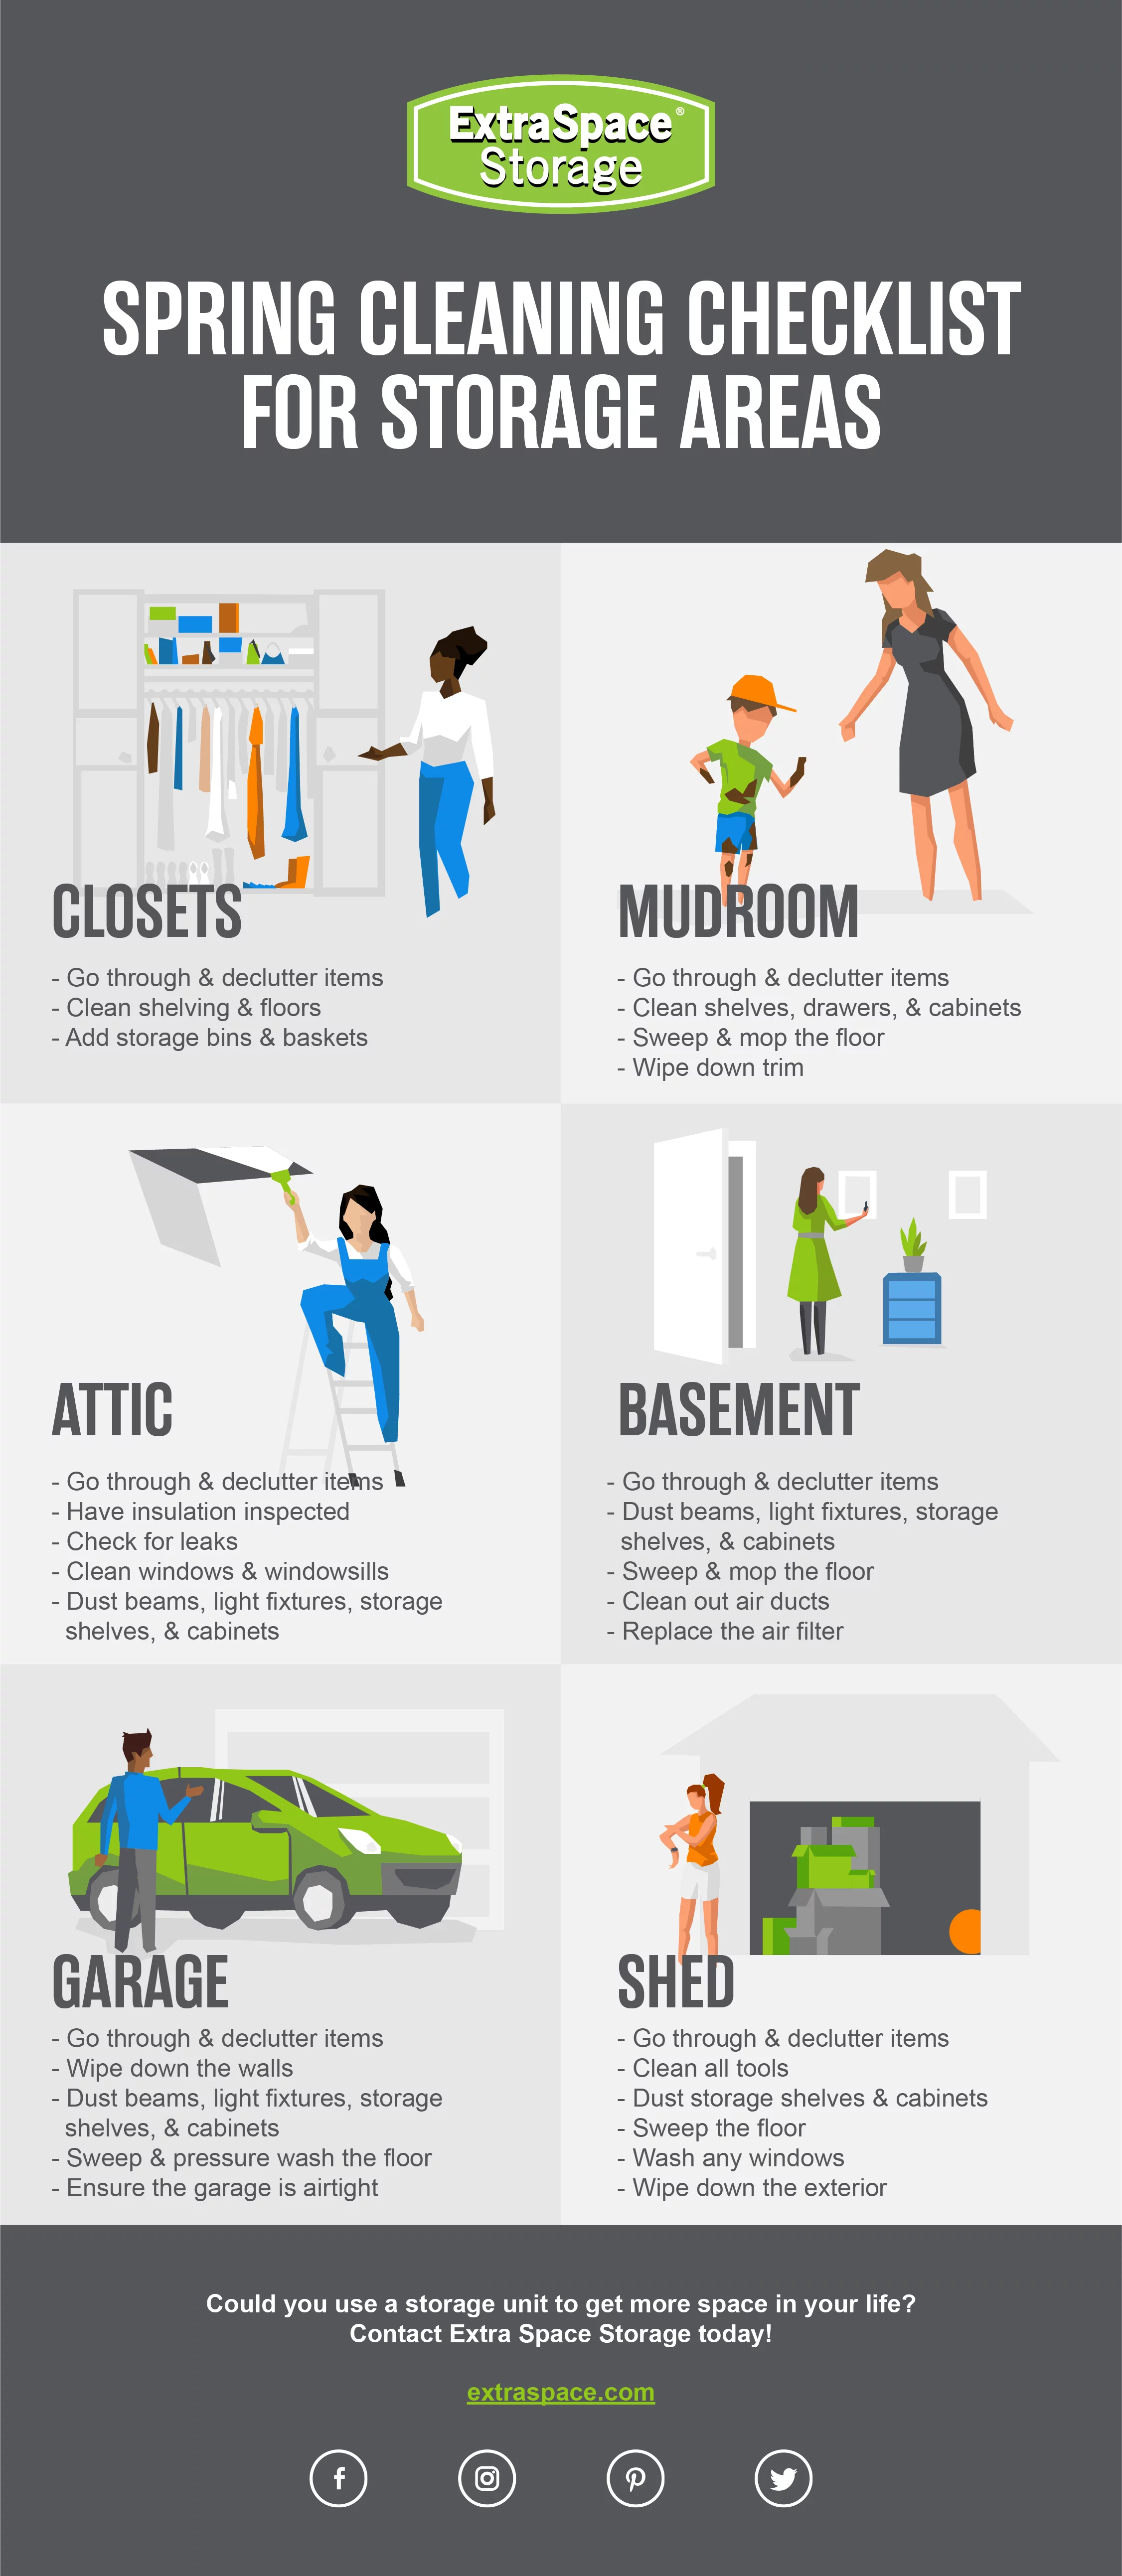 https://www.extraspace.com/blog/wp-content/uploads/2022/08/Spring-Cleaning-Checklist-for-Storage-Areas.png.webp